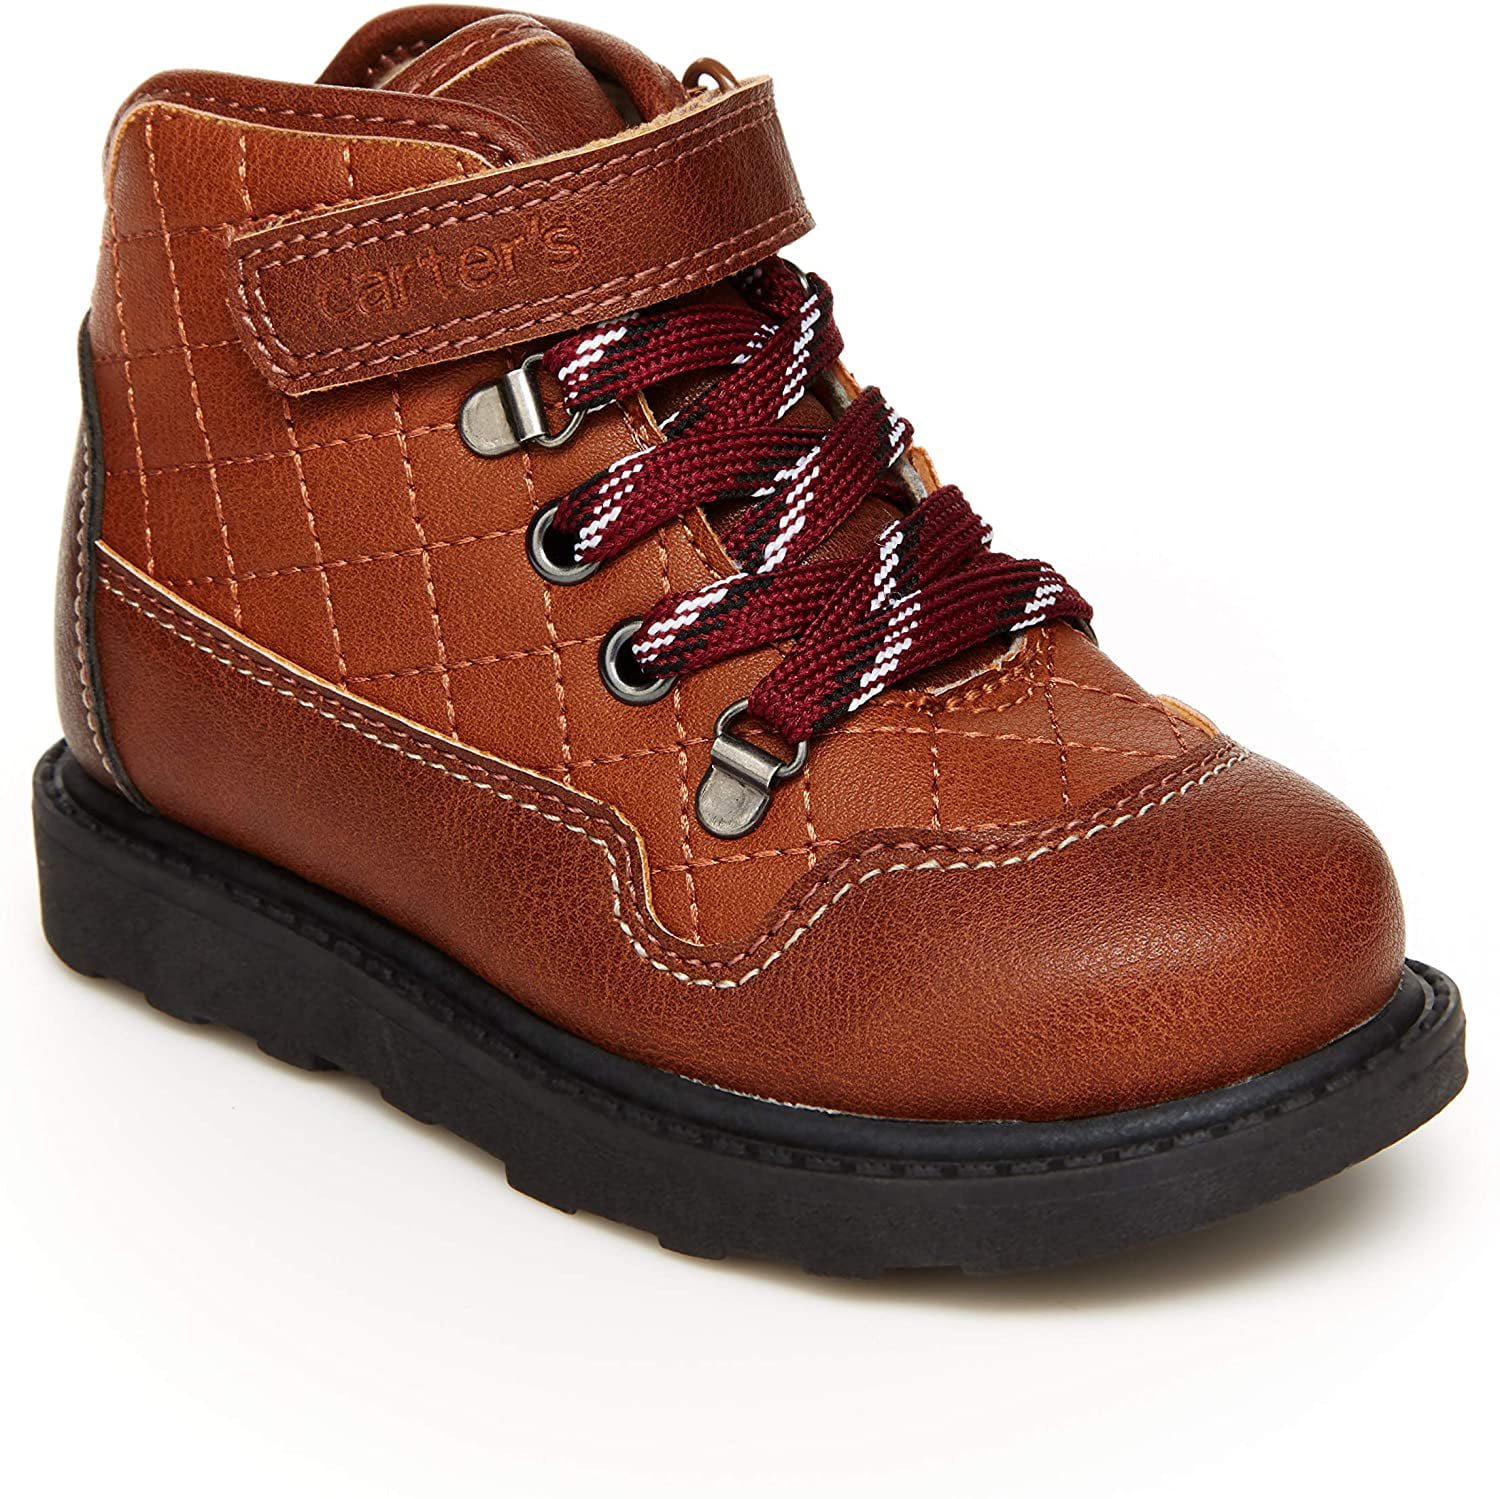 Carter's Unisex-Child Trail Hiking Boot 